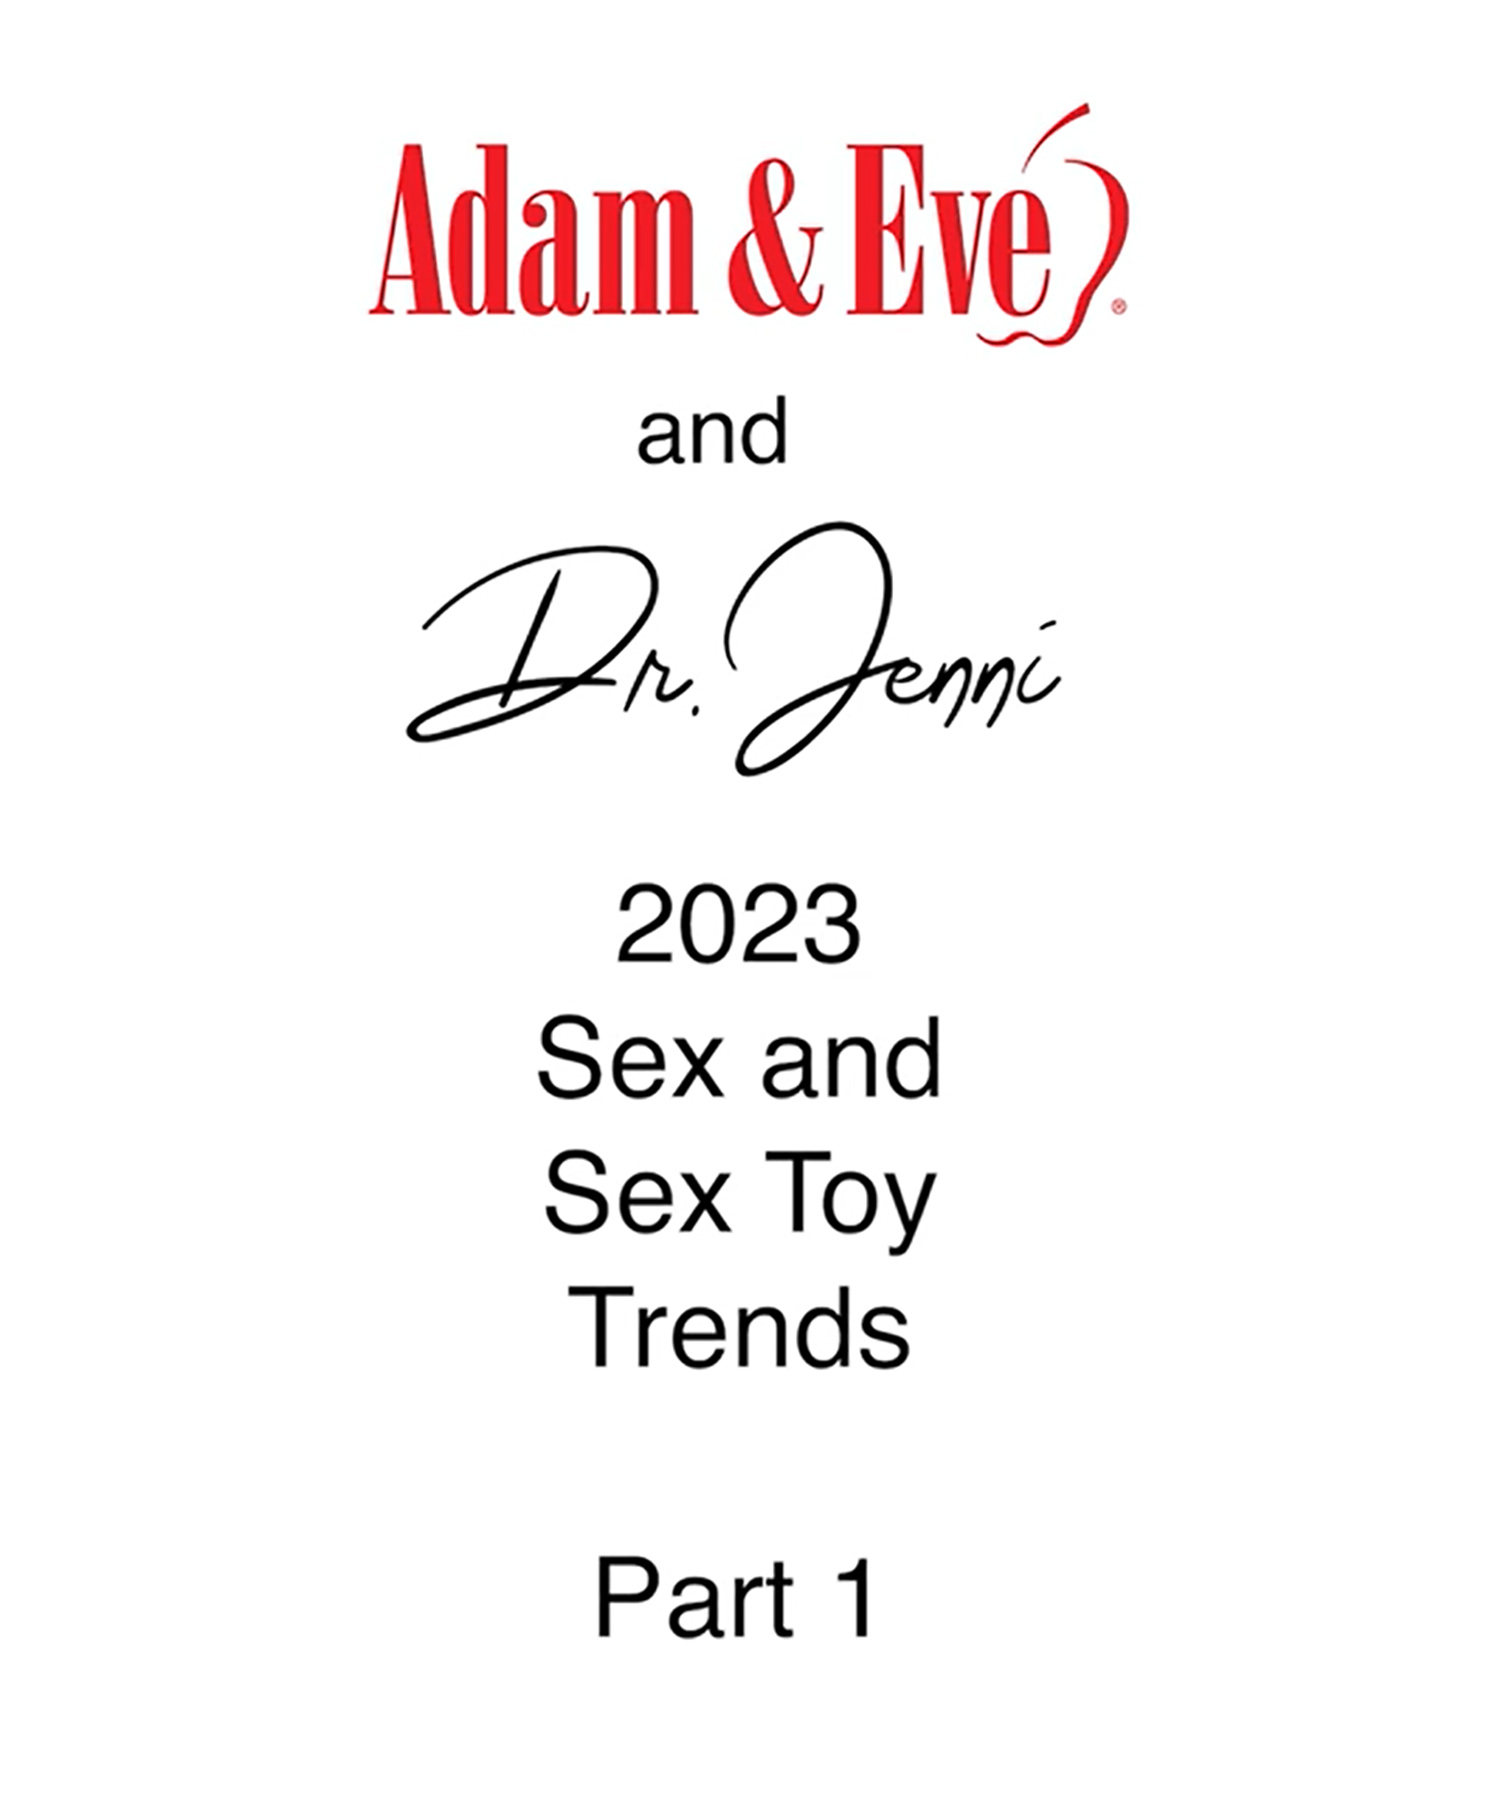 JUST IN TIME FOR VALENTINE'S DAY ADAM & EVE SHARES 2023 SEX/SEX TOY TRENDS